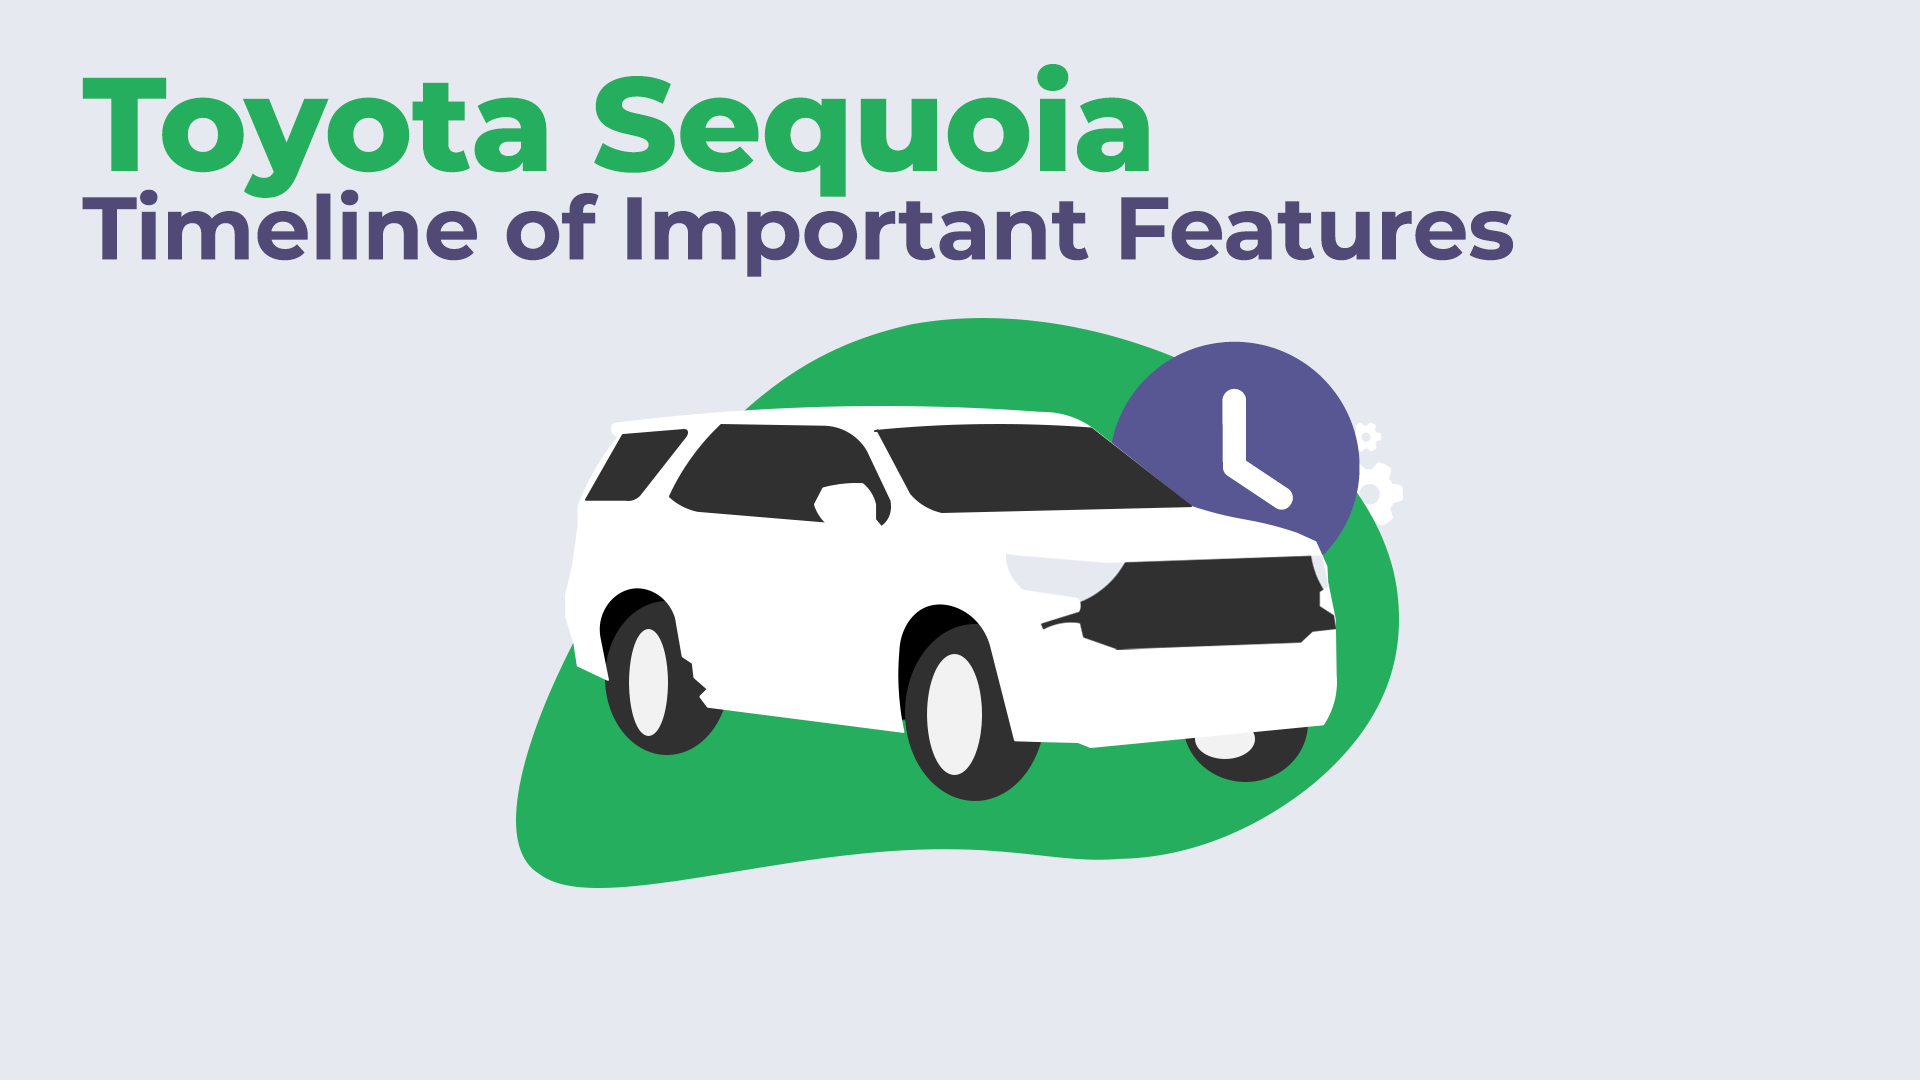 Toyota Sequoia's Important features timeline